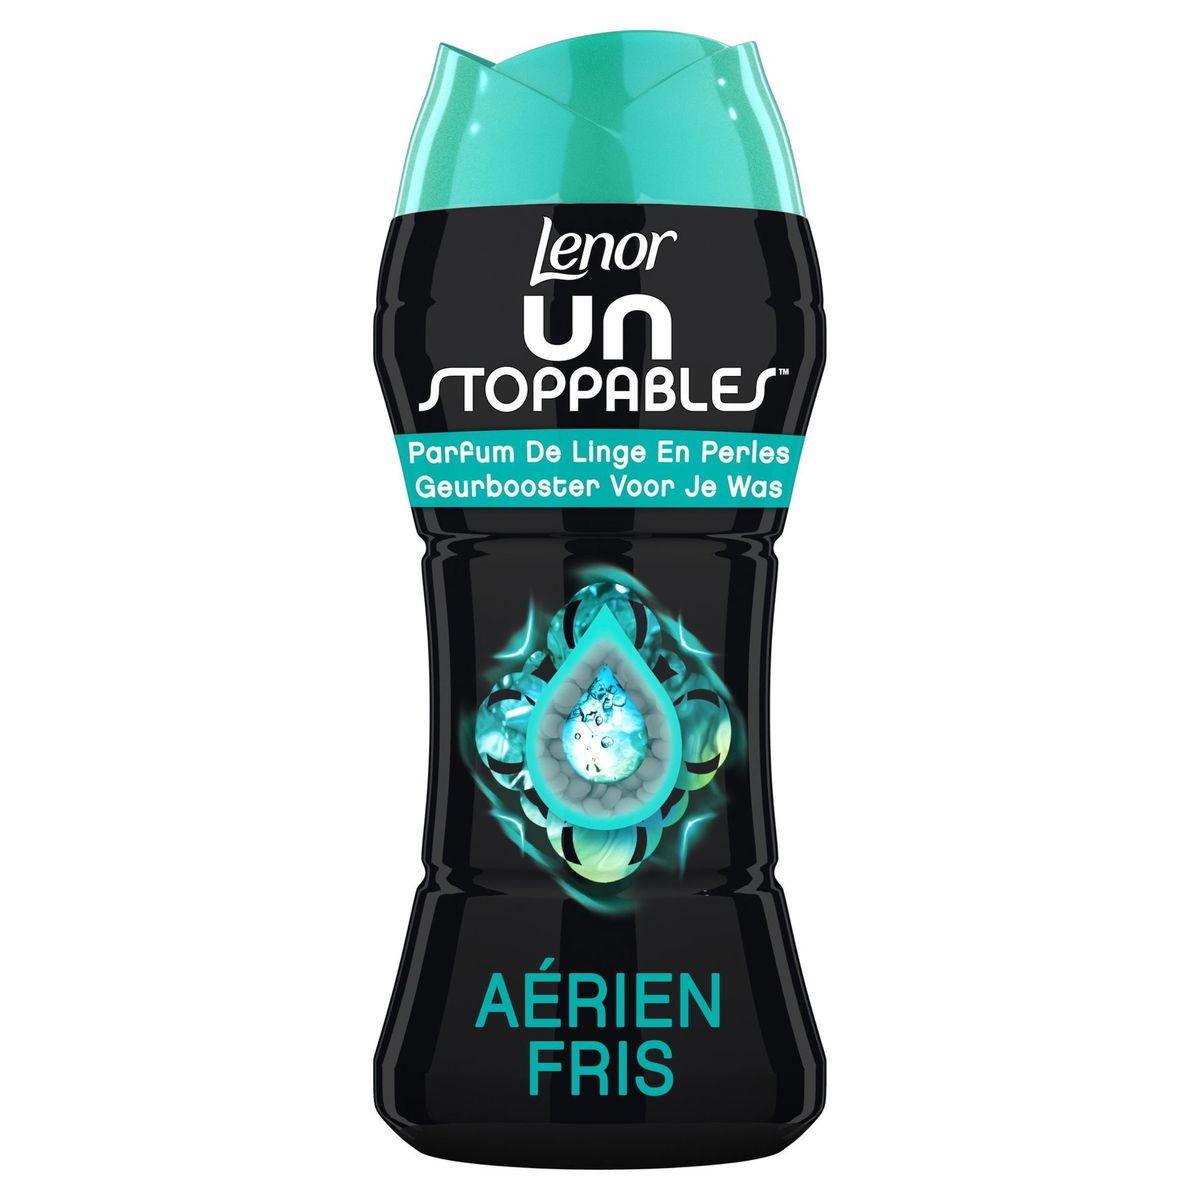 Lenor Unstoppables Fris In-Wash Geurbooster 224g